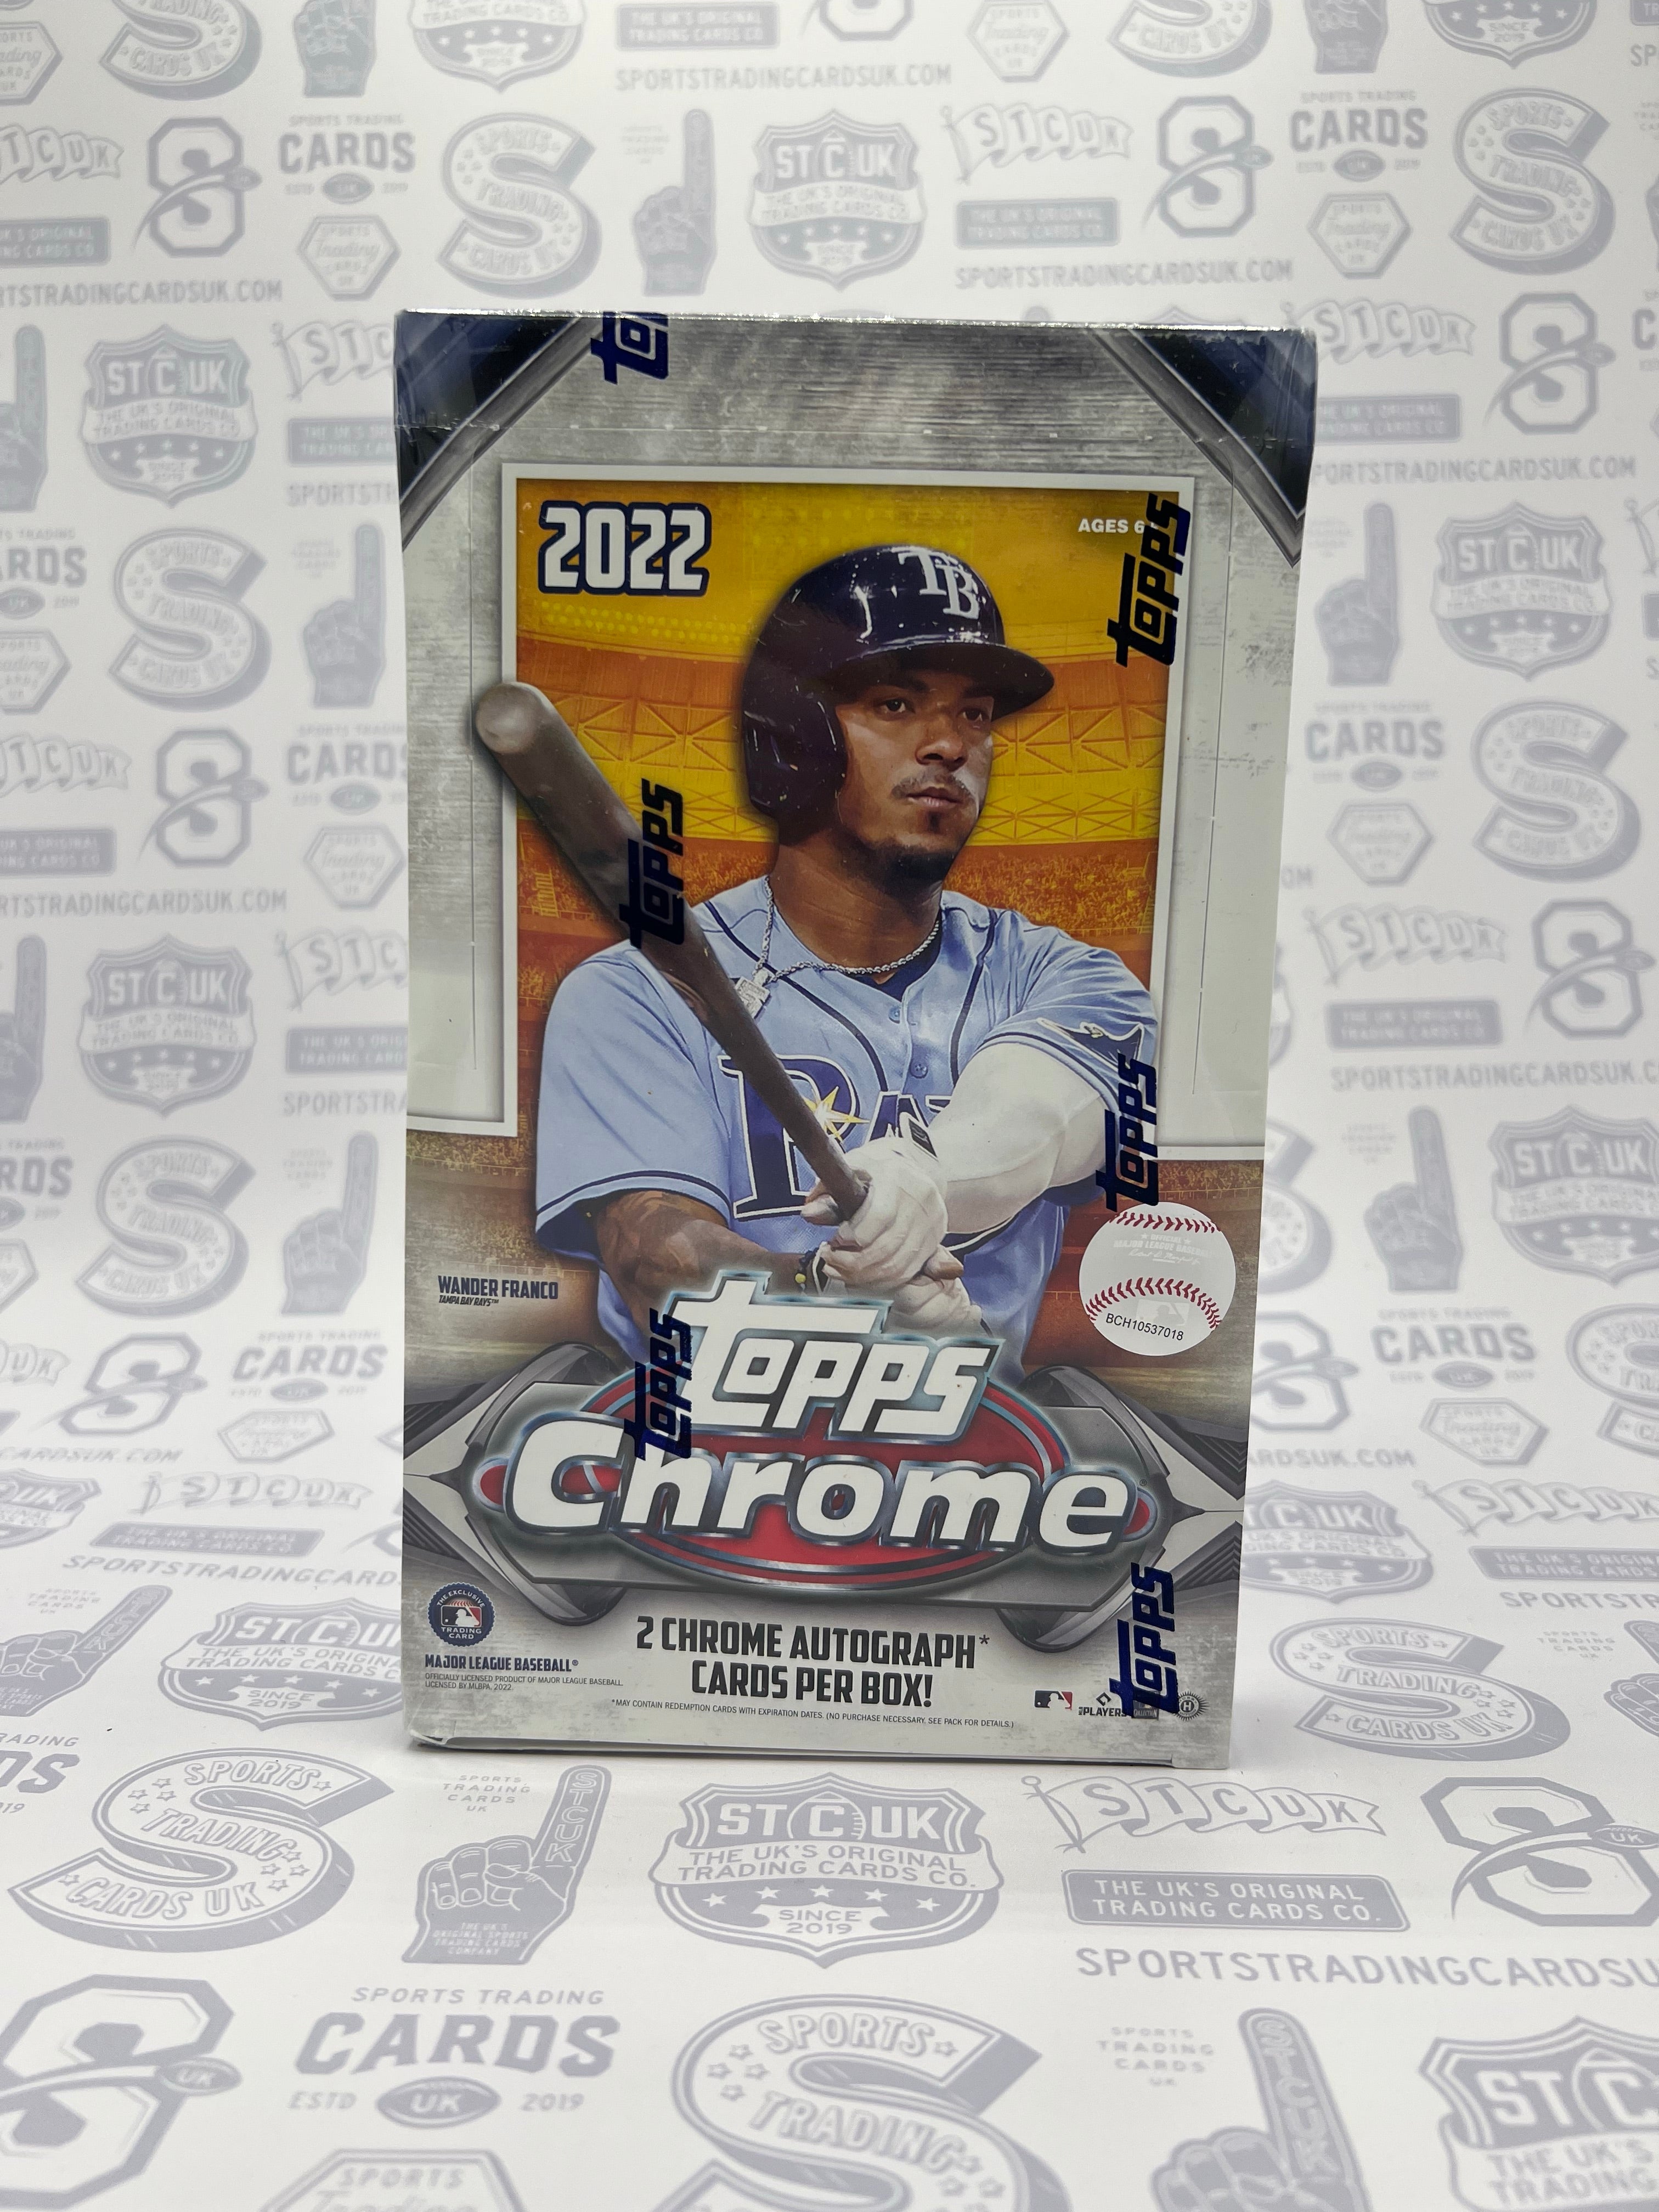 This is for One Mini Box of 2021 Bowman Chrome Baseball Look 